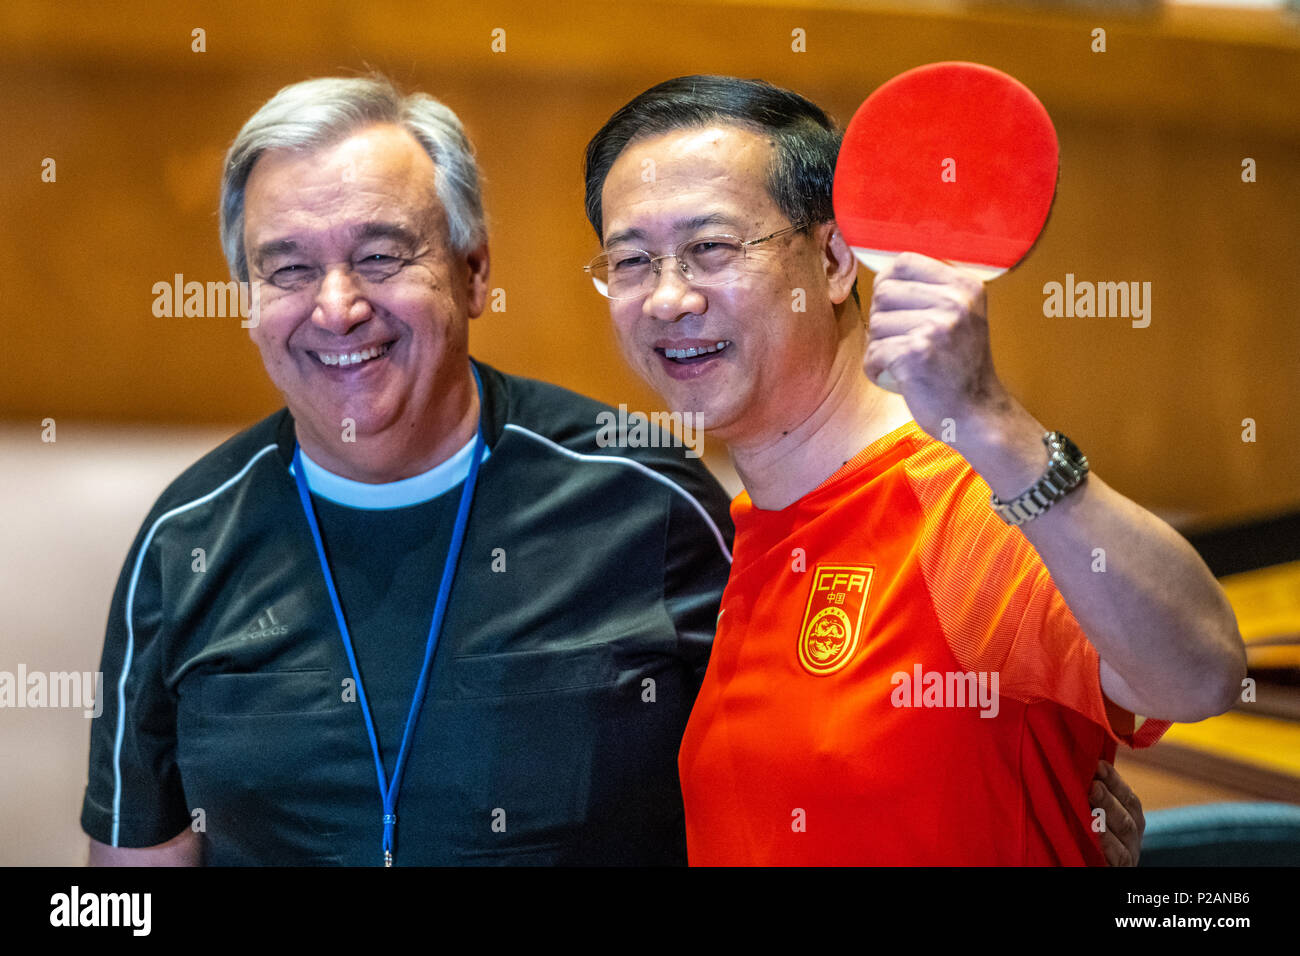 New York, USA, 14 June 2018. United Nations Secretary-General António Guterres wears a referee jersey as China's Security Council member Ma Zhaoxu wears his team's soccer jersey and holds a table tennis racket  to mark the opening day of the 2018 FIFA World Cup, being hosted by the Russian Federation from 14 June to 15 July. Credit: Enrique Shore/Alamy Live News Stock Photo